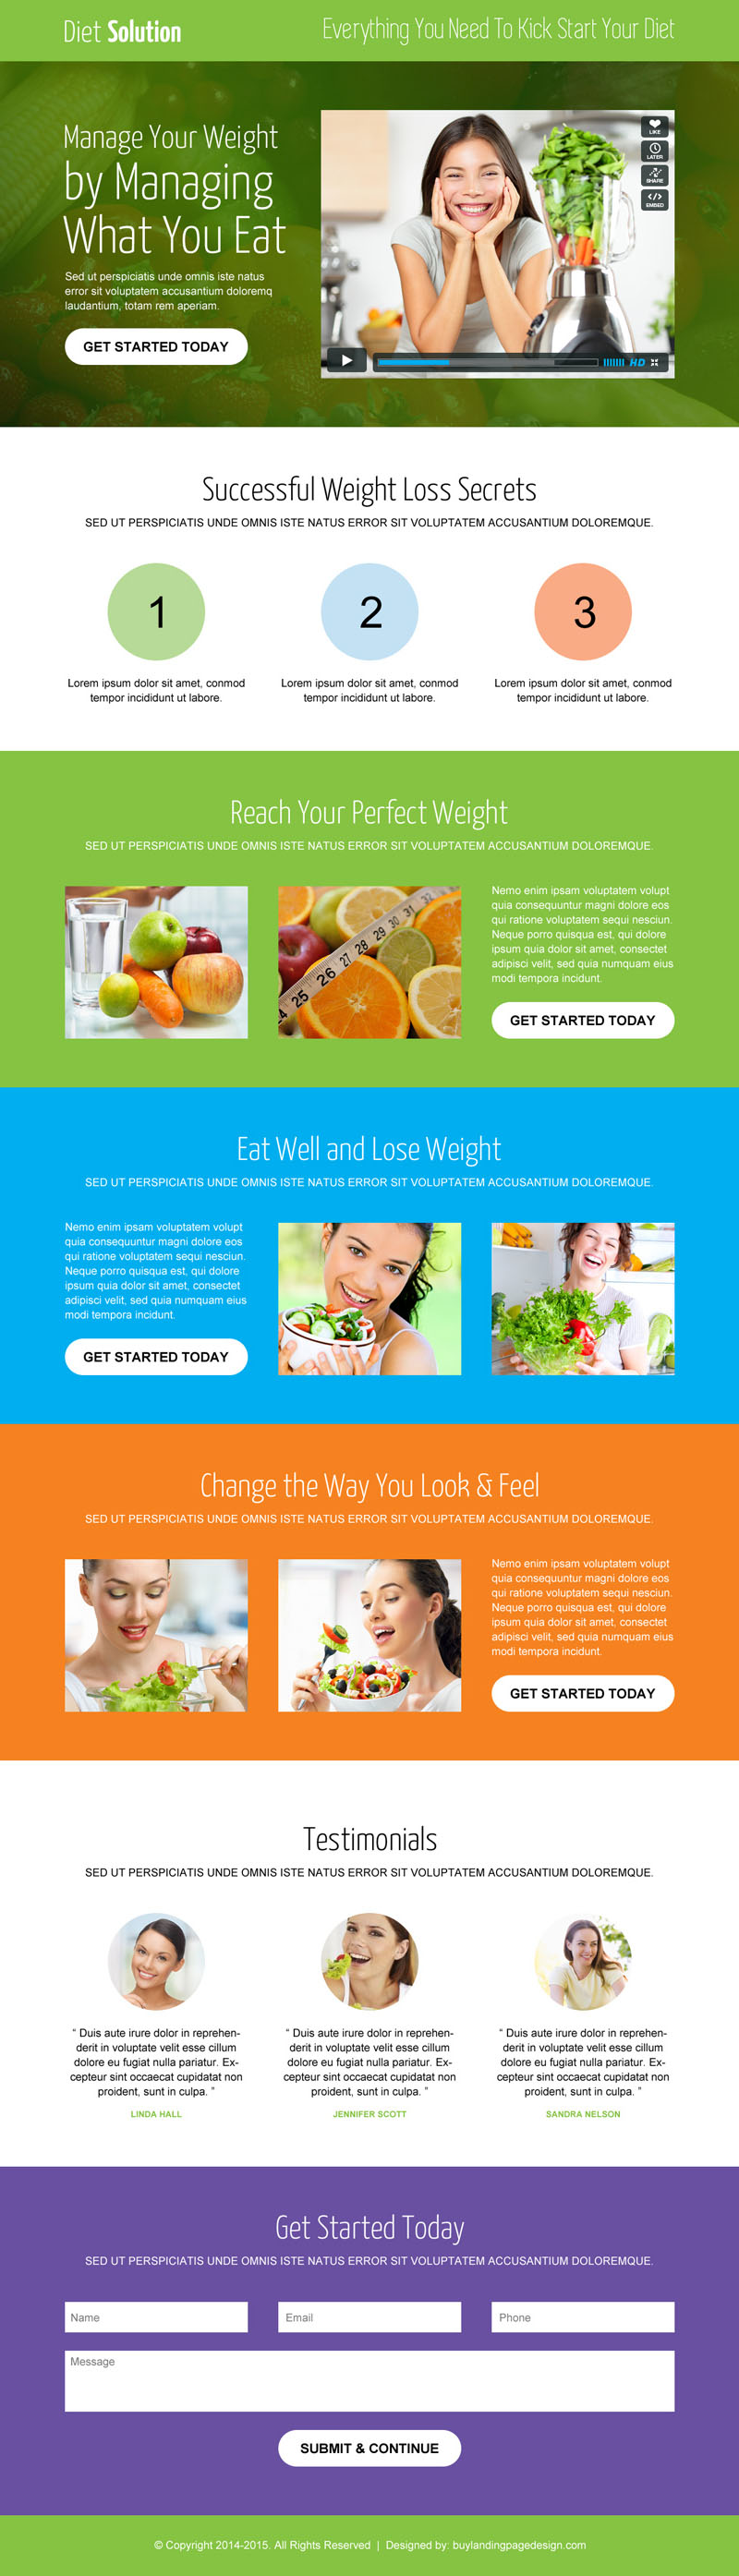 best-weight-loss-diet-responsive-video-lead-capture-landing-page-design-template-014